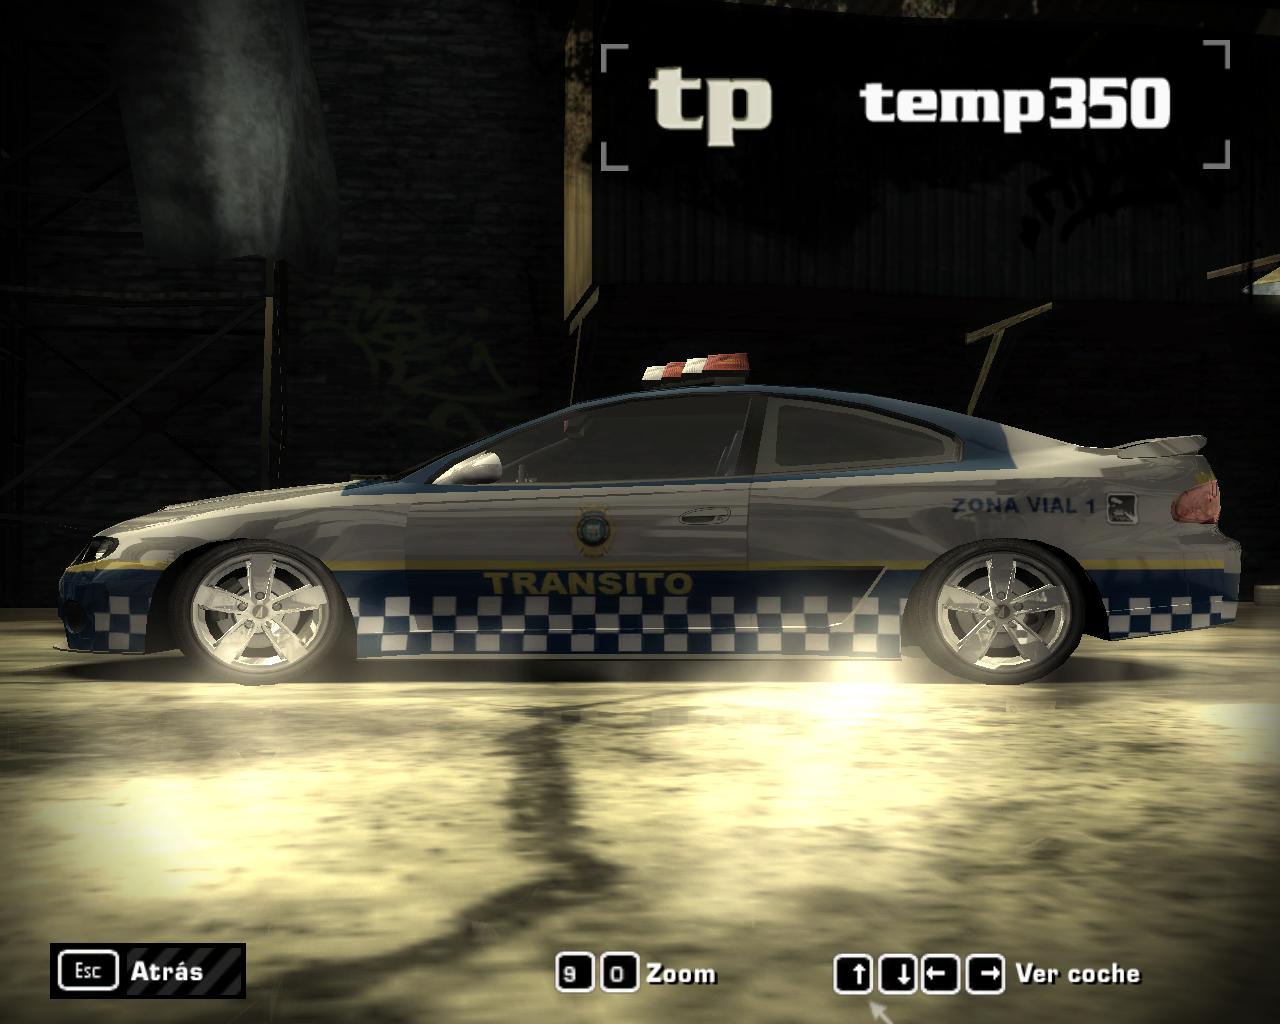 Need For Speed Most Wanted Pontiac GTO Pursuit: Mexico City Transito Police Car